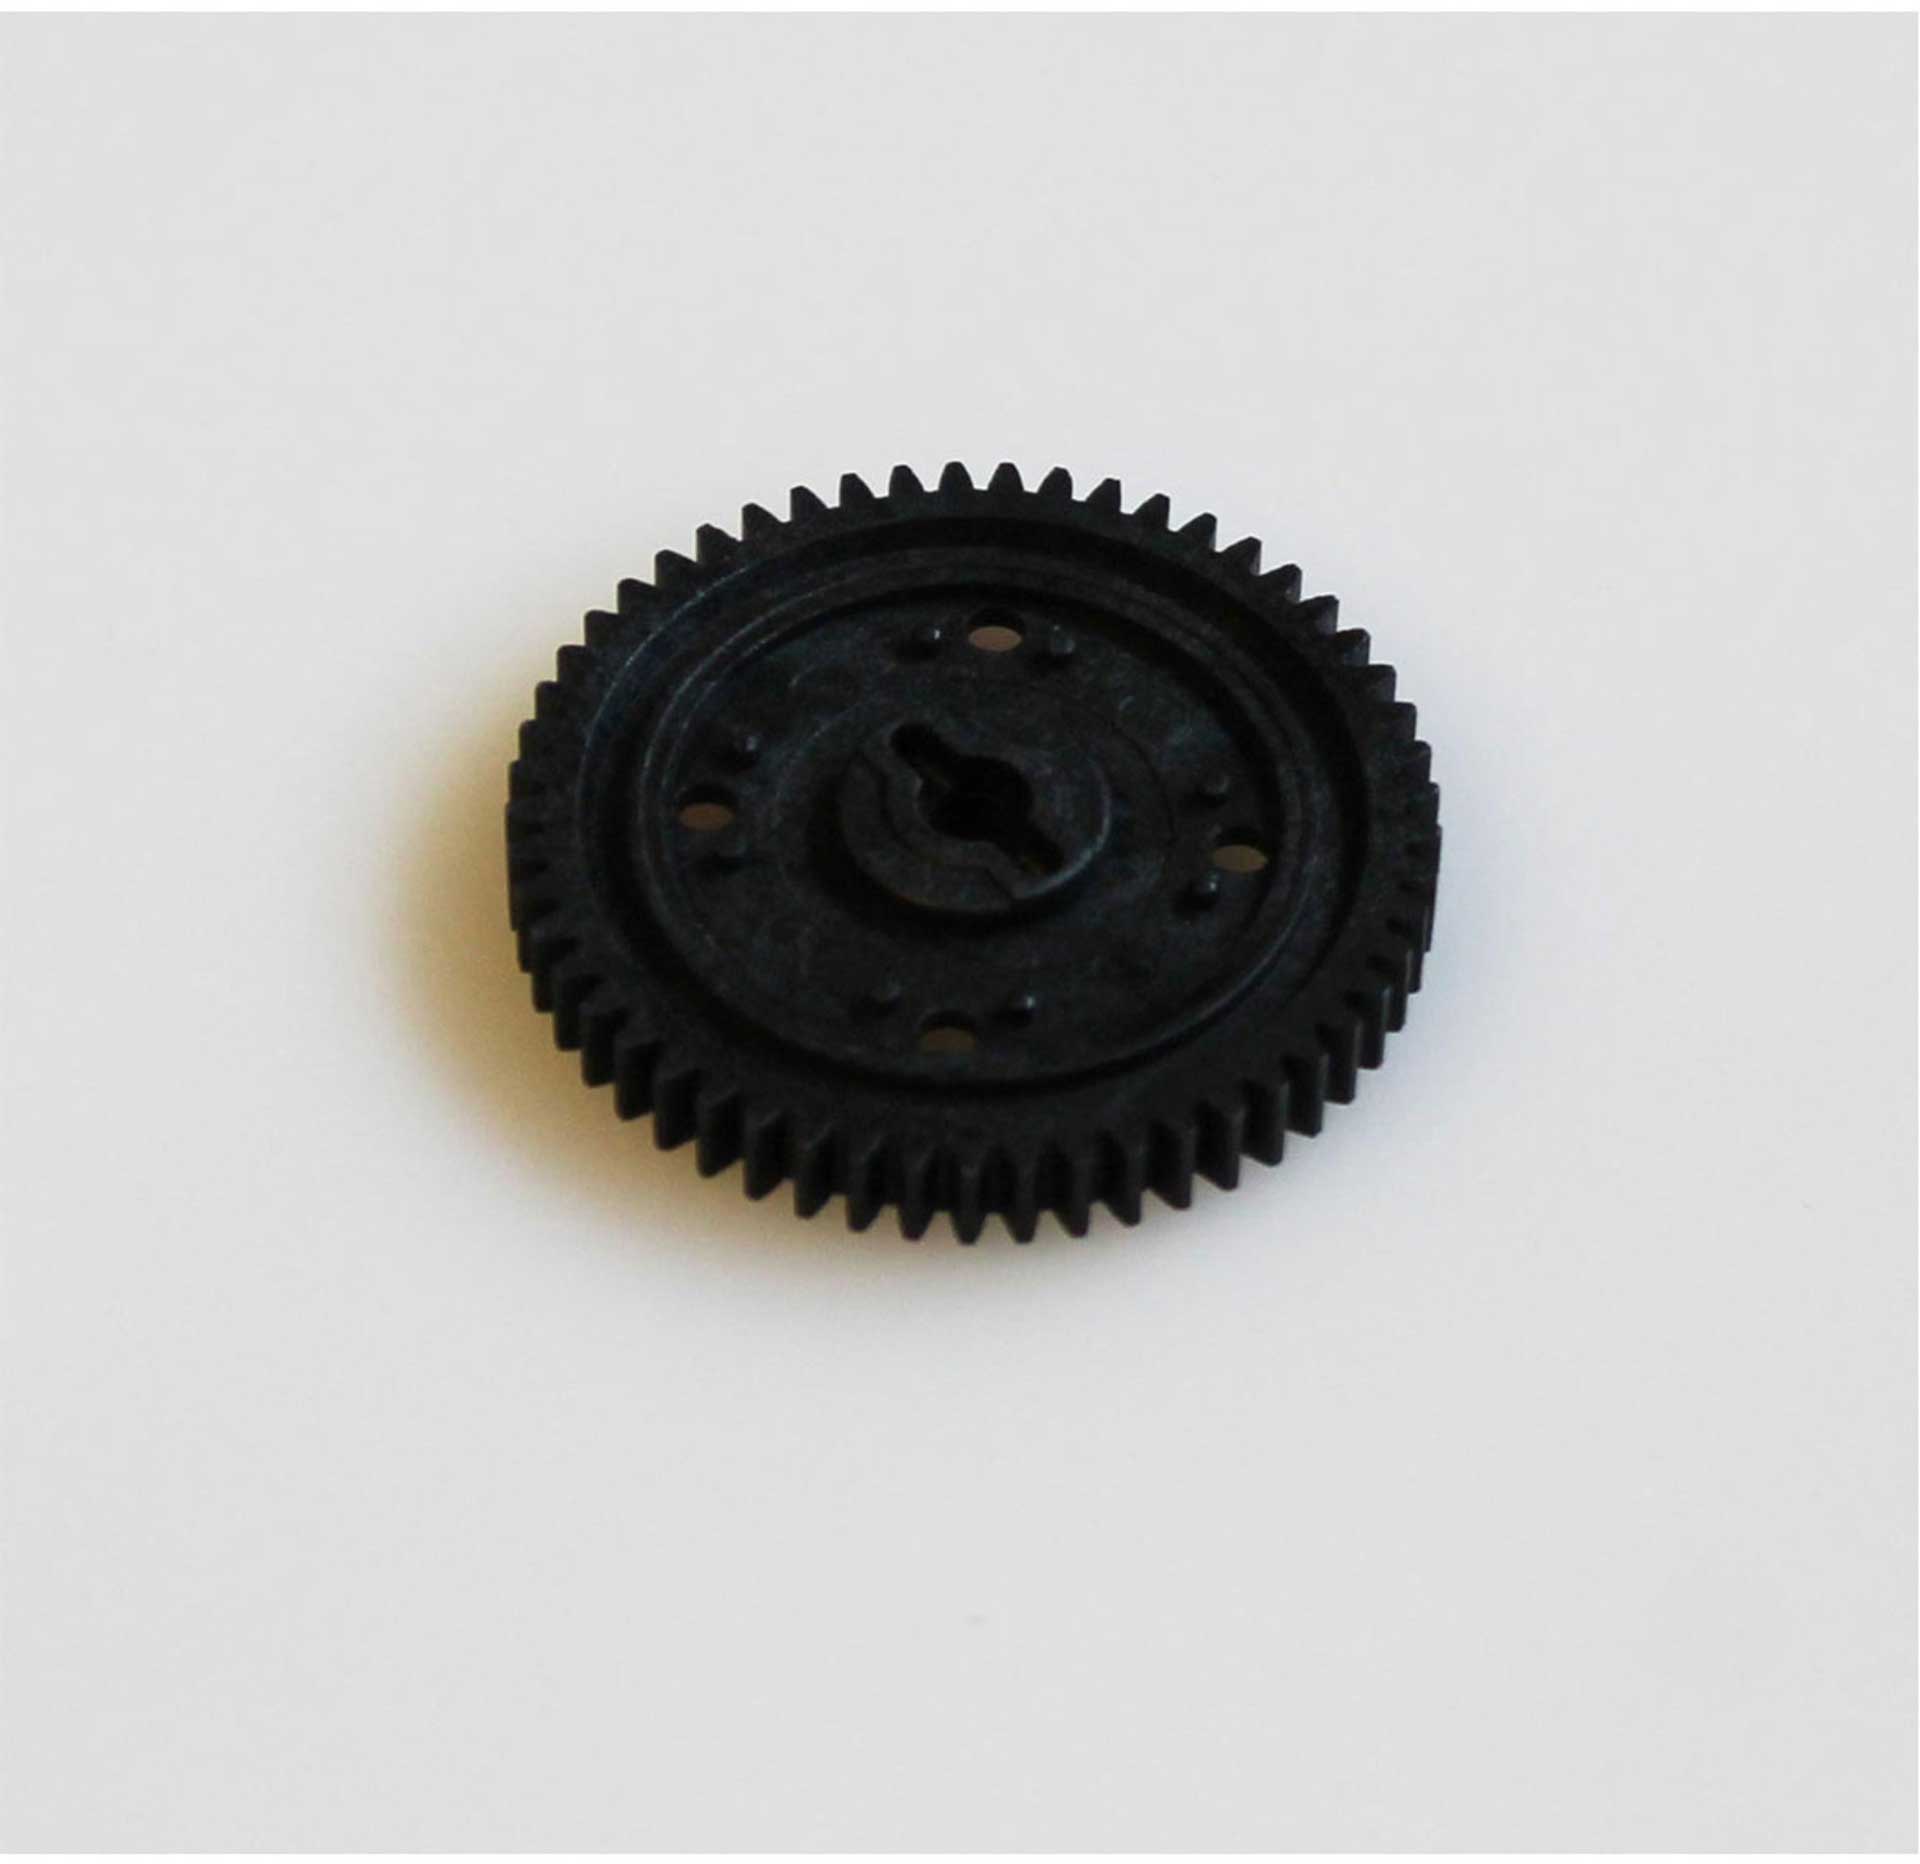 DRIVE & FLY MODELS SPUR GEAR   GHOSTFIGHTER